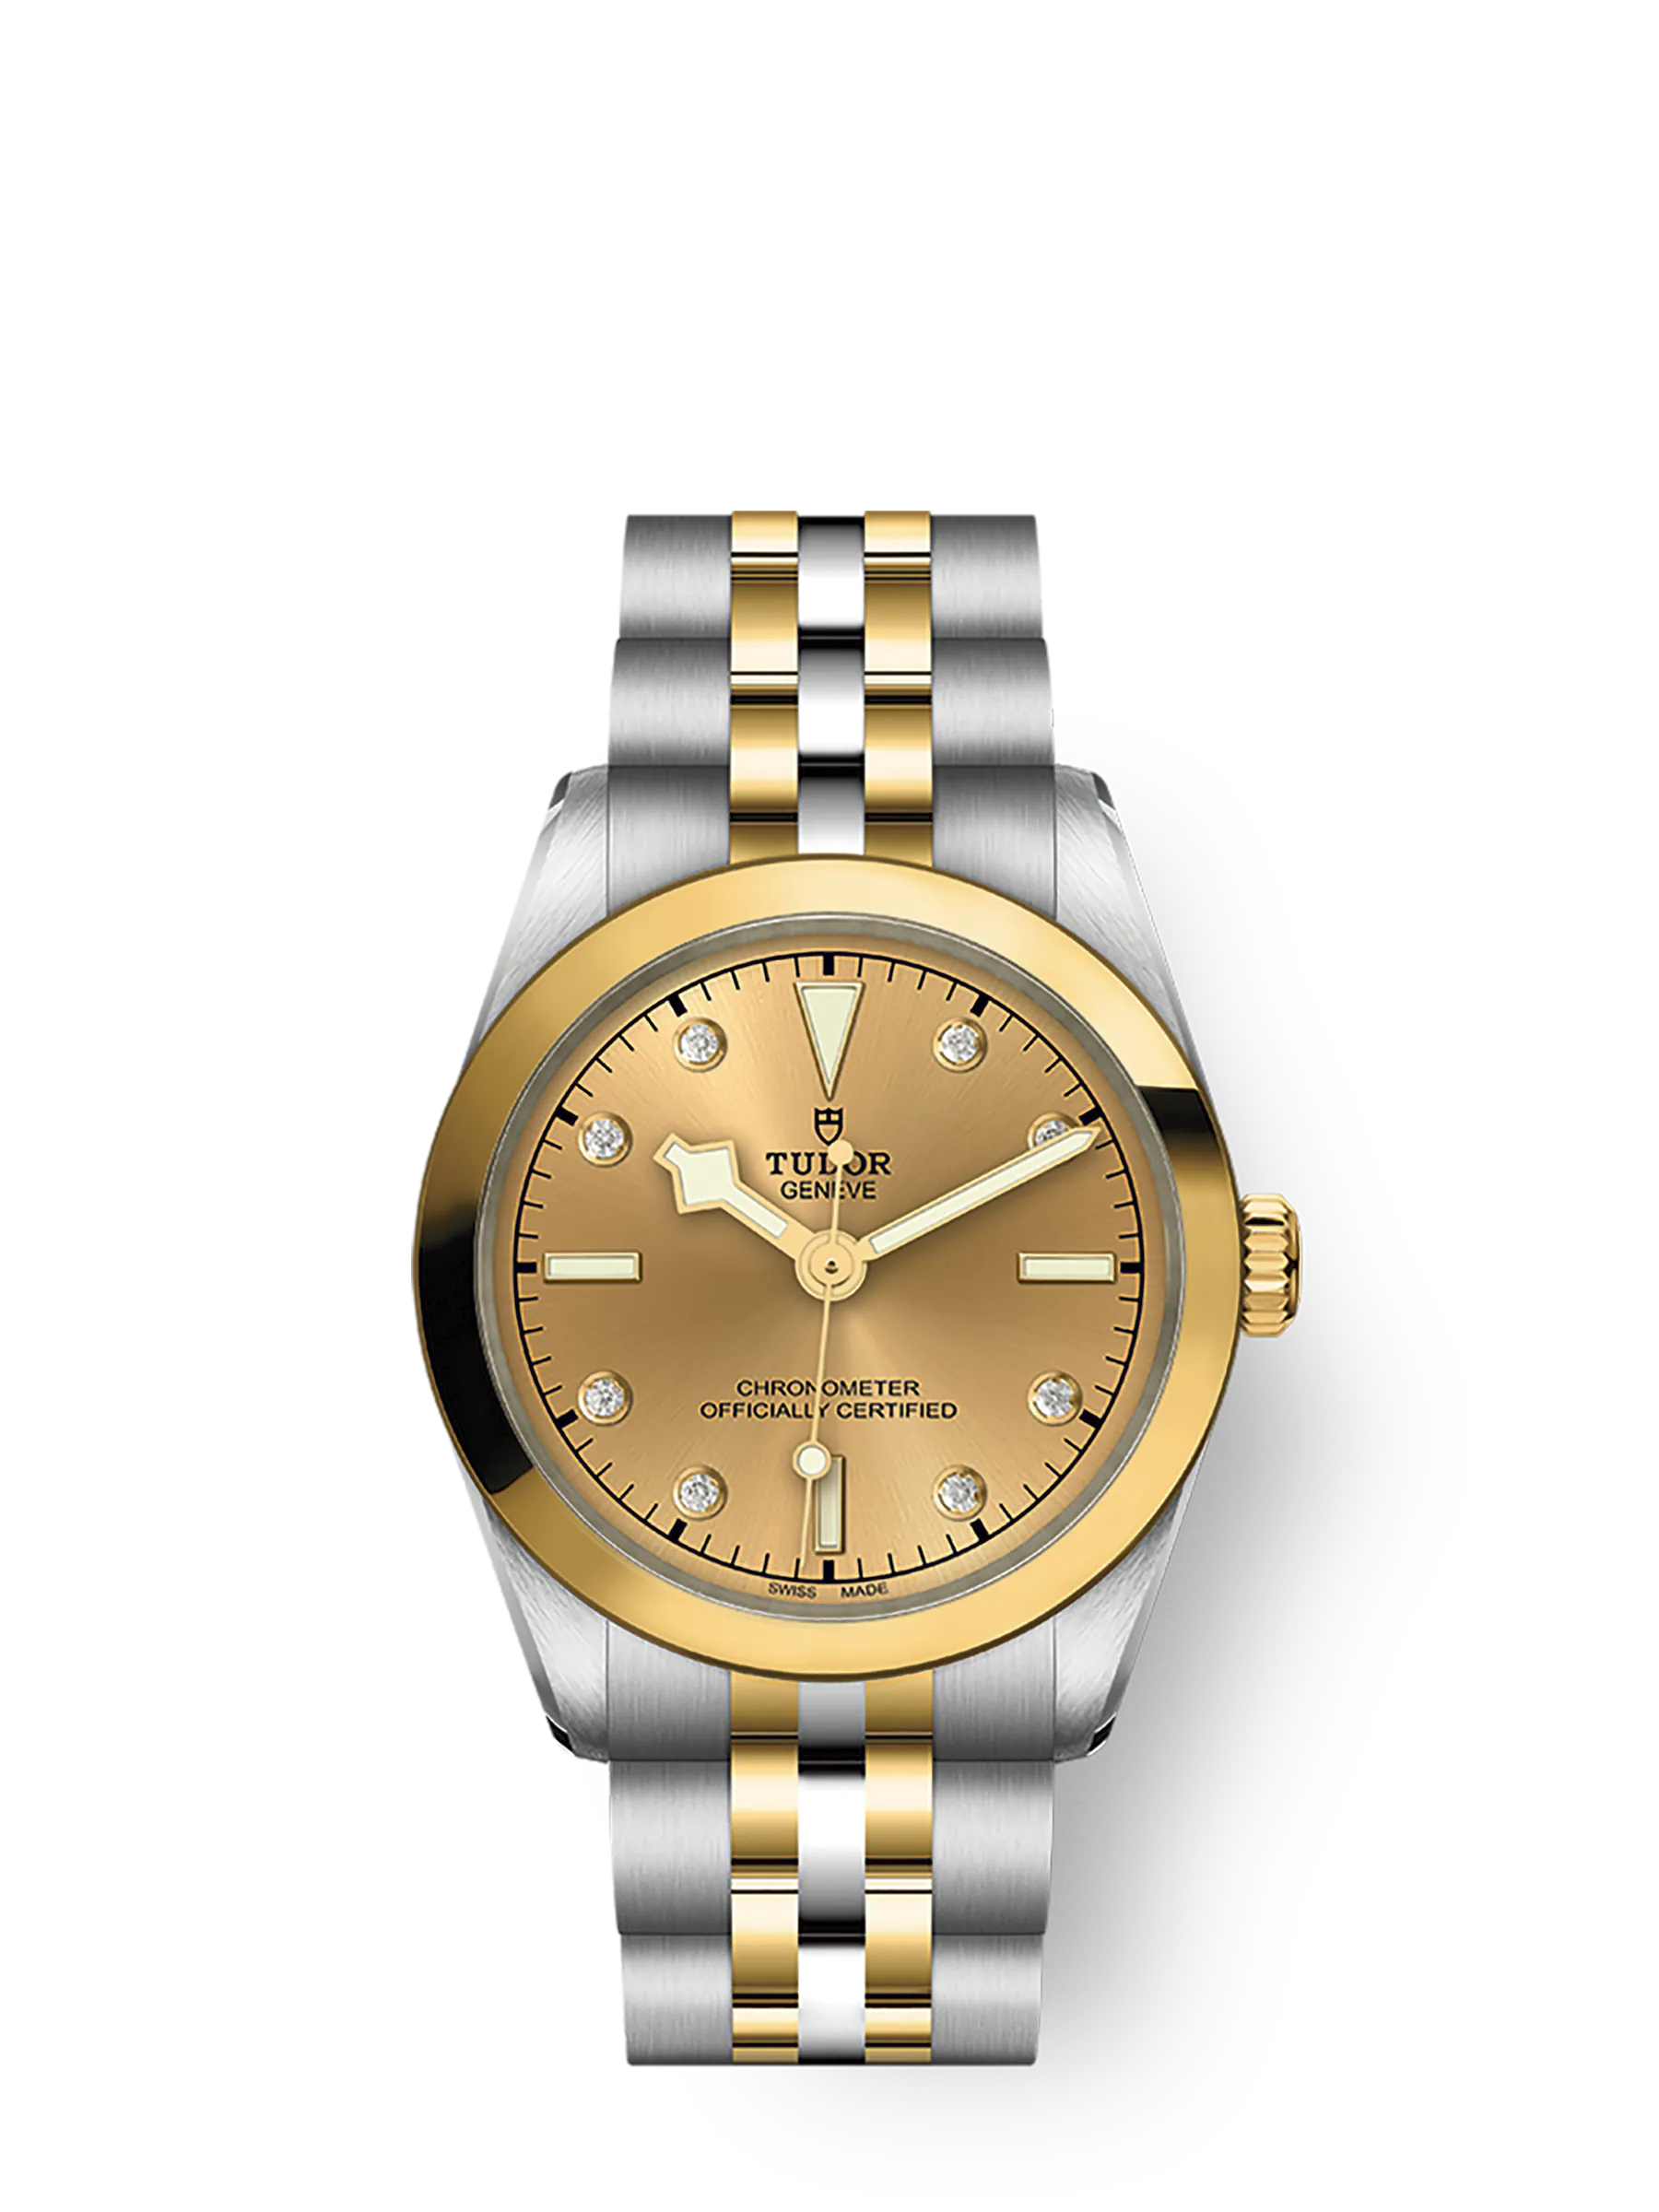 Tudor Black Bay 31 S&G, 316L Stainless Steel and 18k Yellow Gold, Ref# M79603-0008